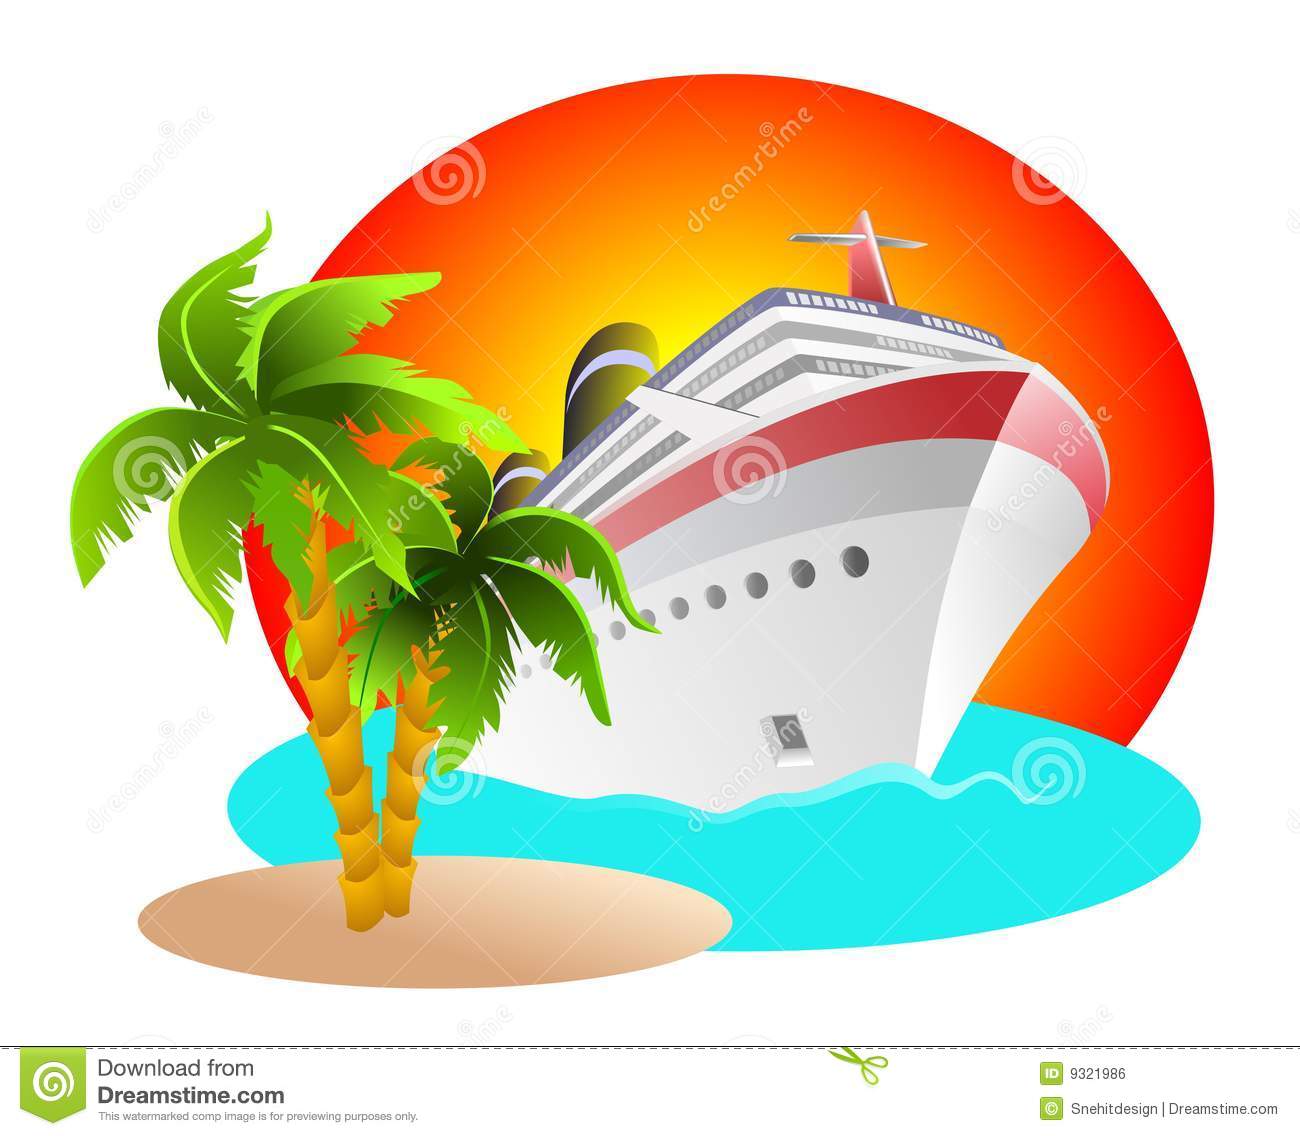 Awesome cruise ship clipart